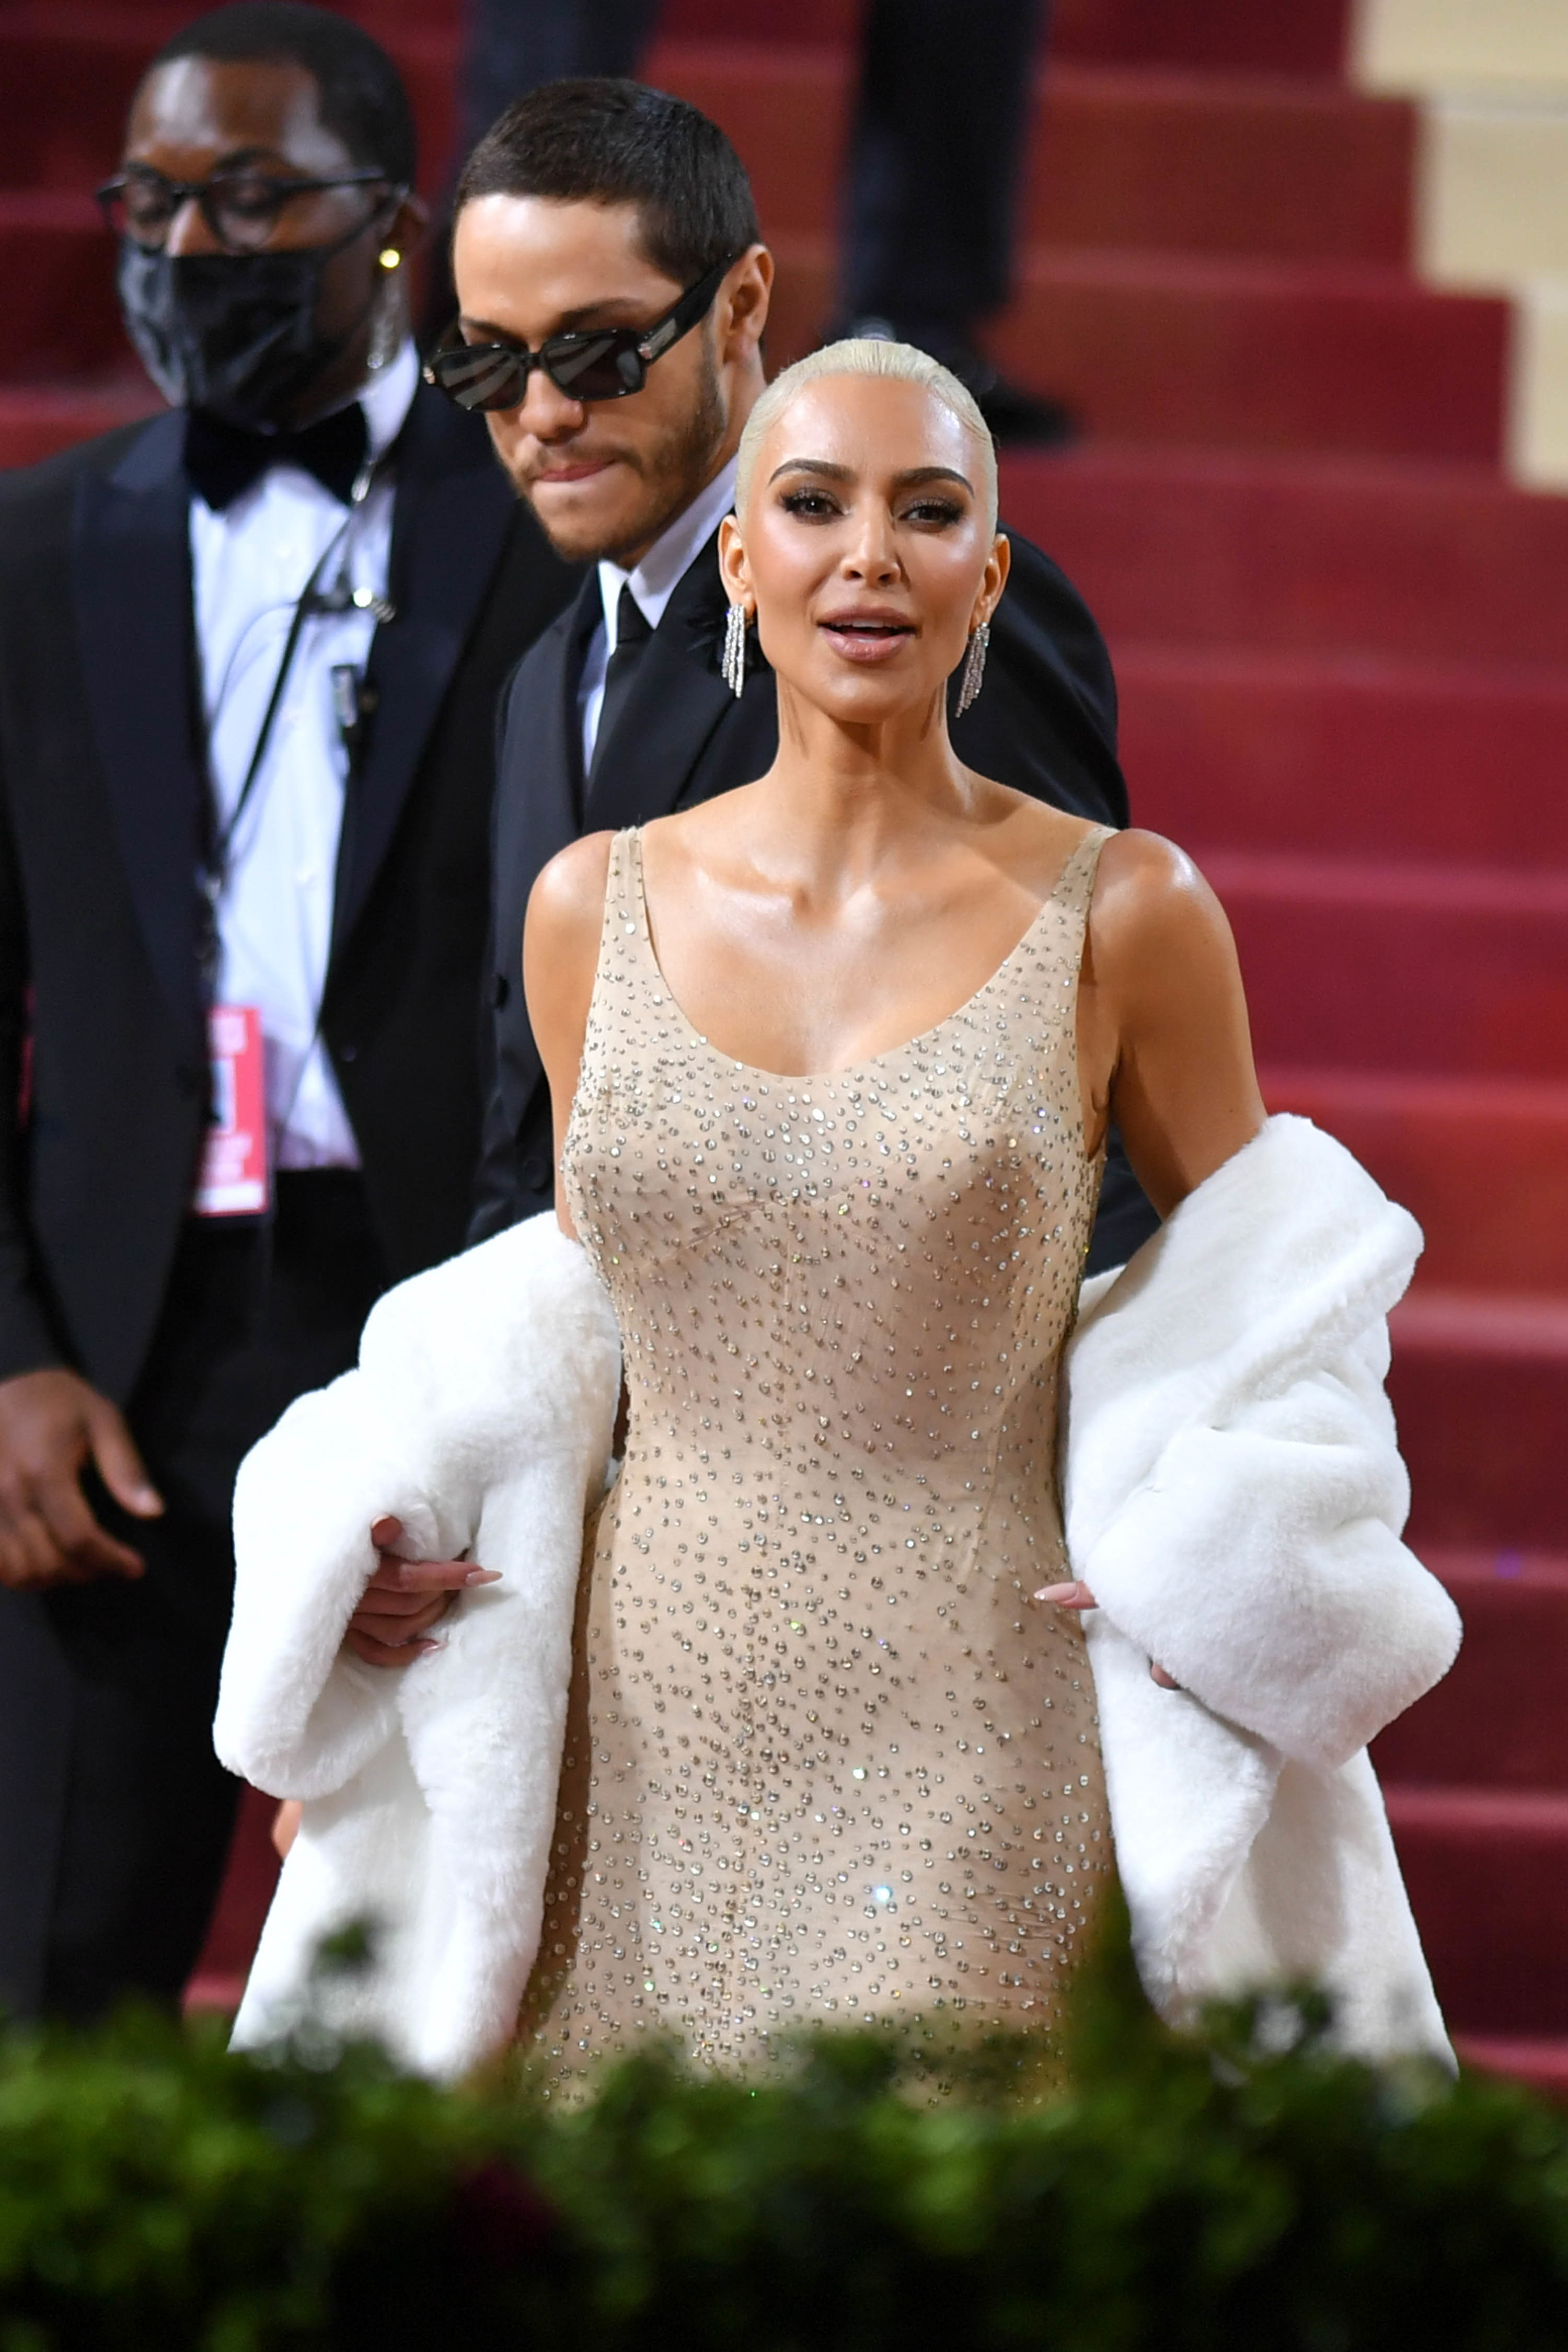 Kim Kardashian on the red carpet wearing a tight beige sequinned dress and a fluffy white coat around her arms